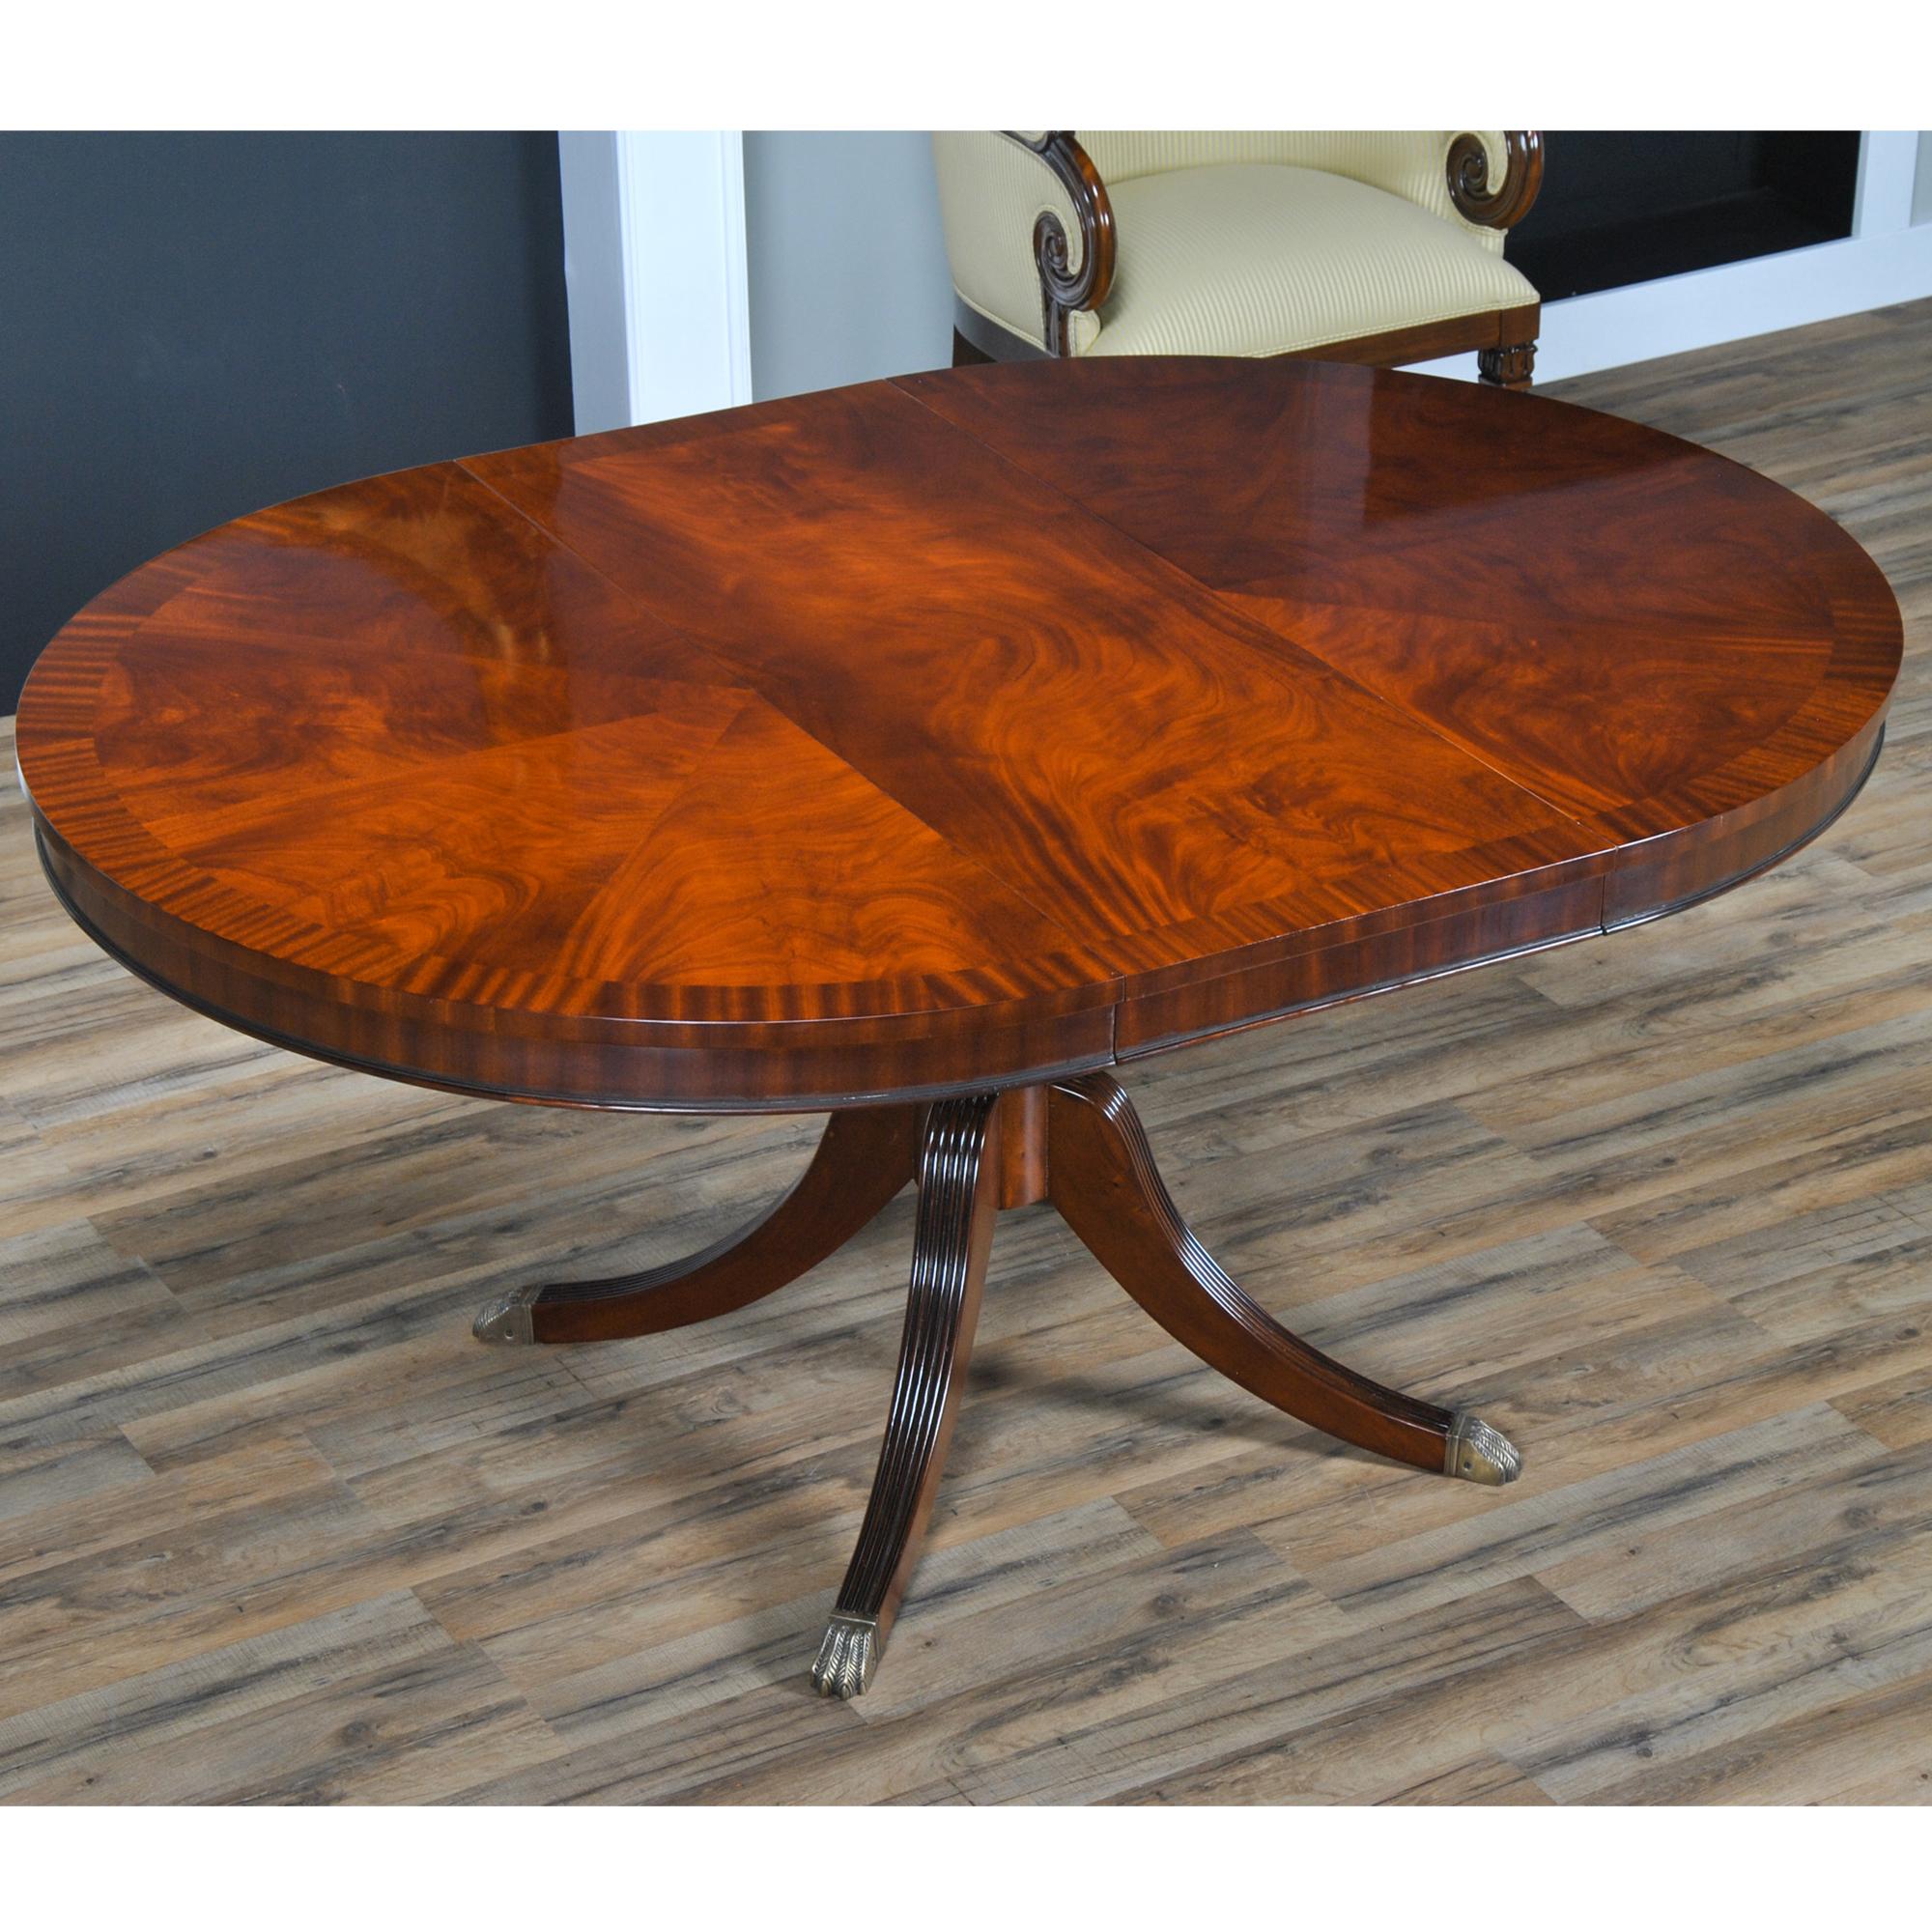 Always popular this 48″ Round Dining Table extends to an oval shaped dining table of 64″ when the leaf is inserted. The table top is fastened in place using bolts and rests on a reeded solid mahogany base. The base is carved from mahogany solids,